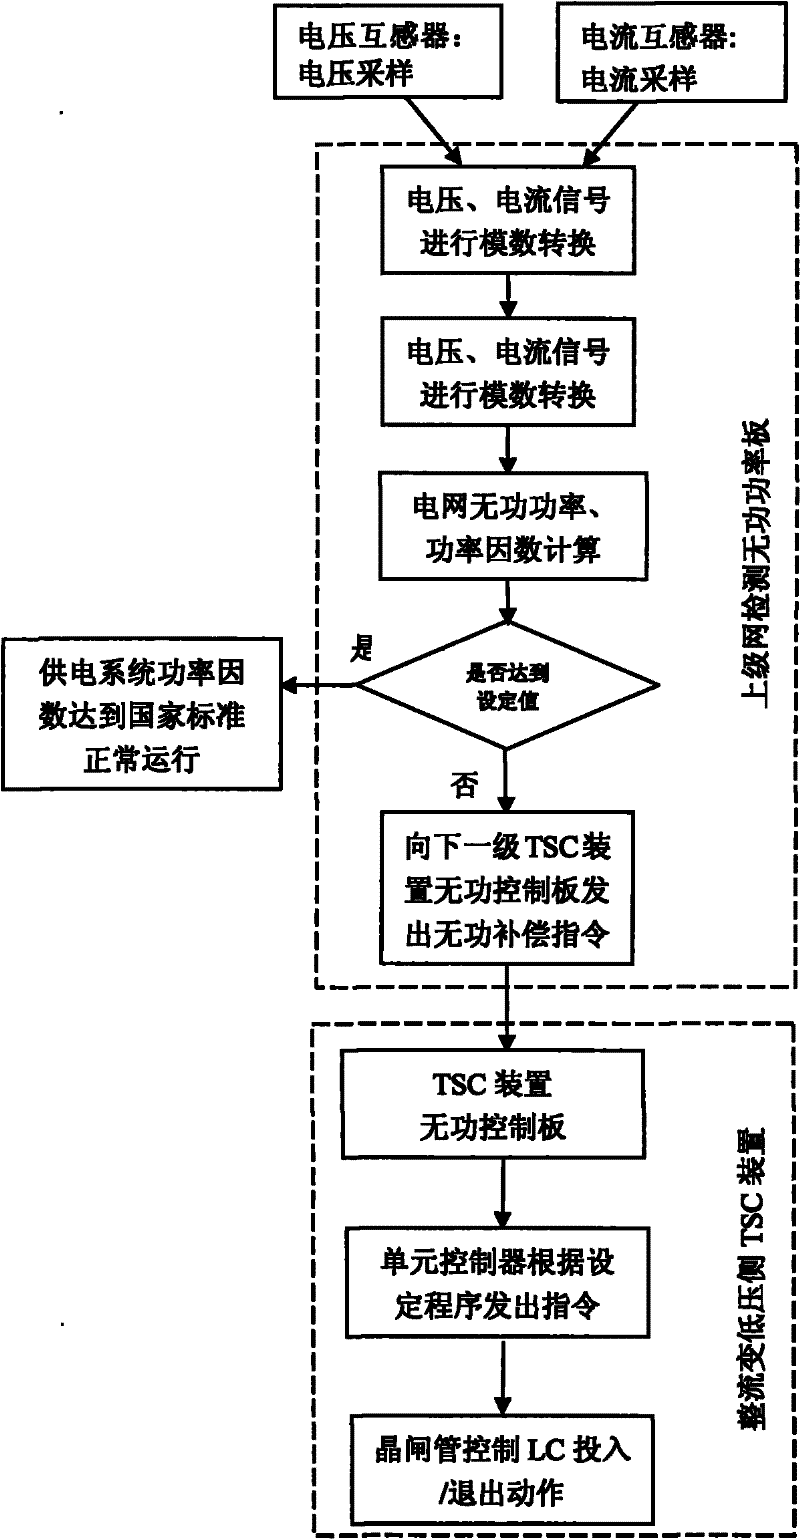 Controller of production clearance reactive power compensation device of power supply in distribution systems of small steel rolling workshop